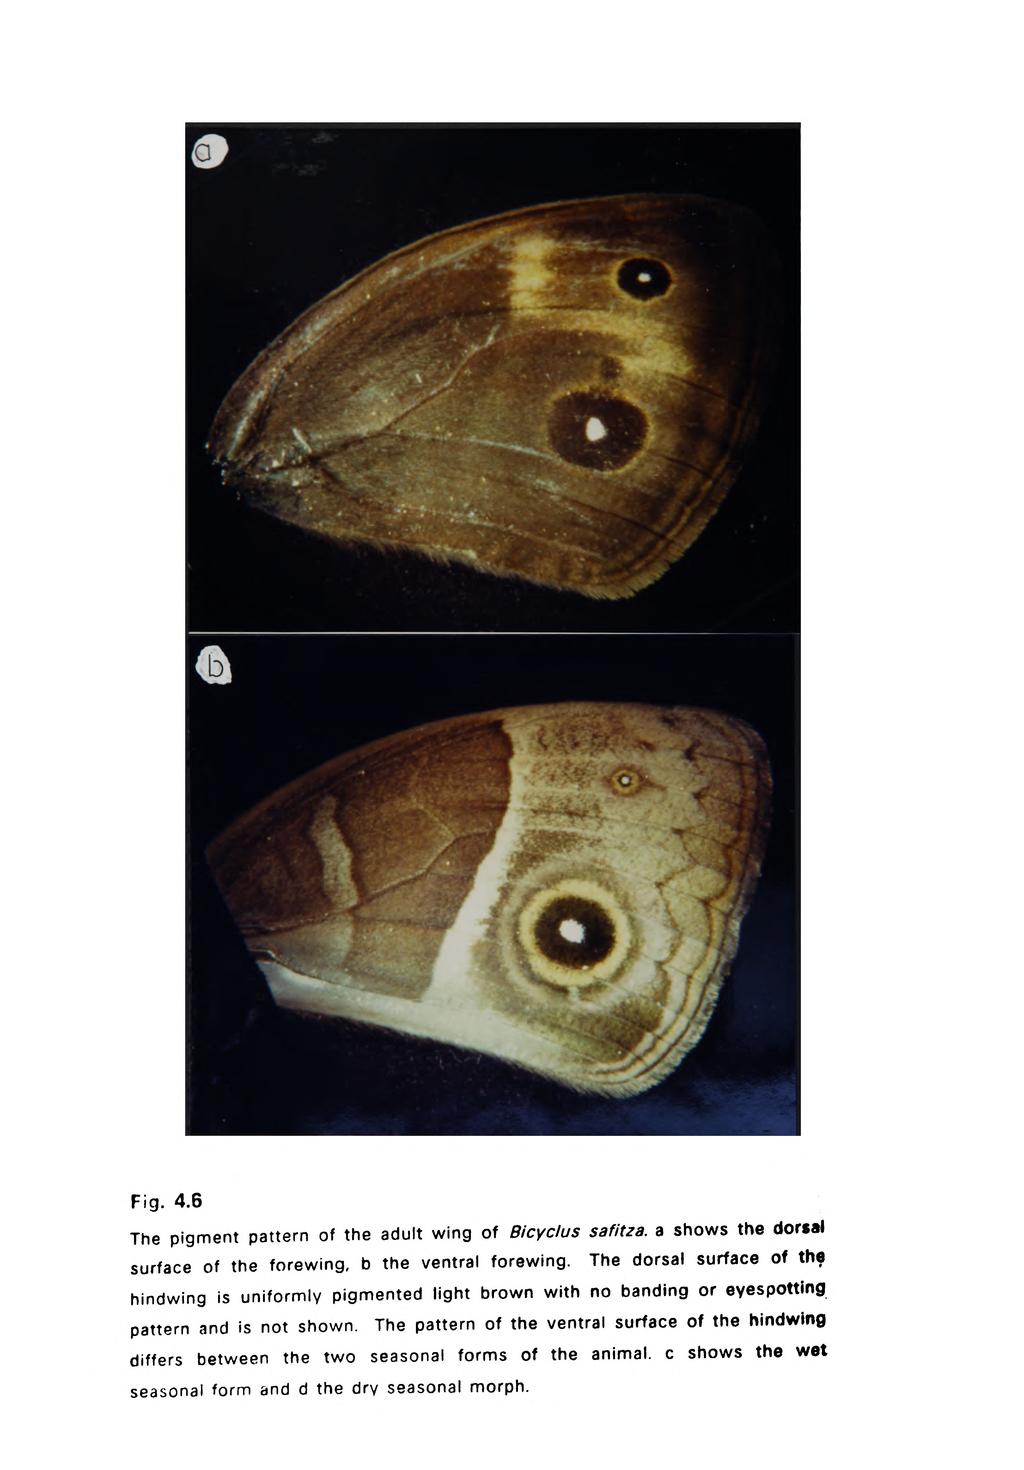 Fig. 4.6 The pigment pattern of the adult wing of Bicyclus safitza. a shows the dorsal surface of the forewing, b the ventral forewing.